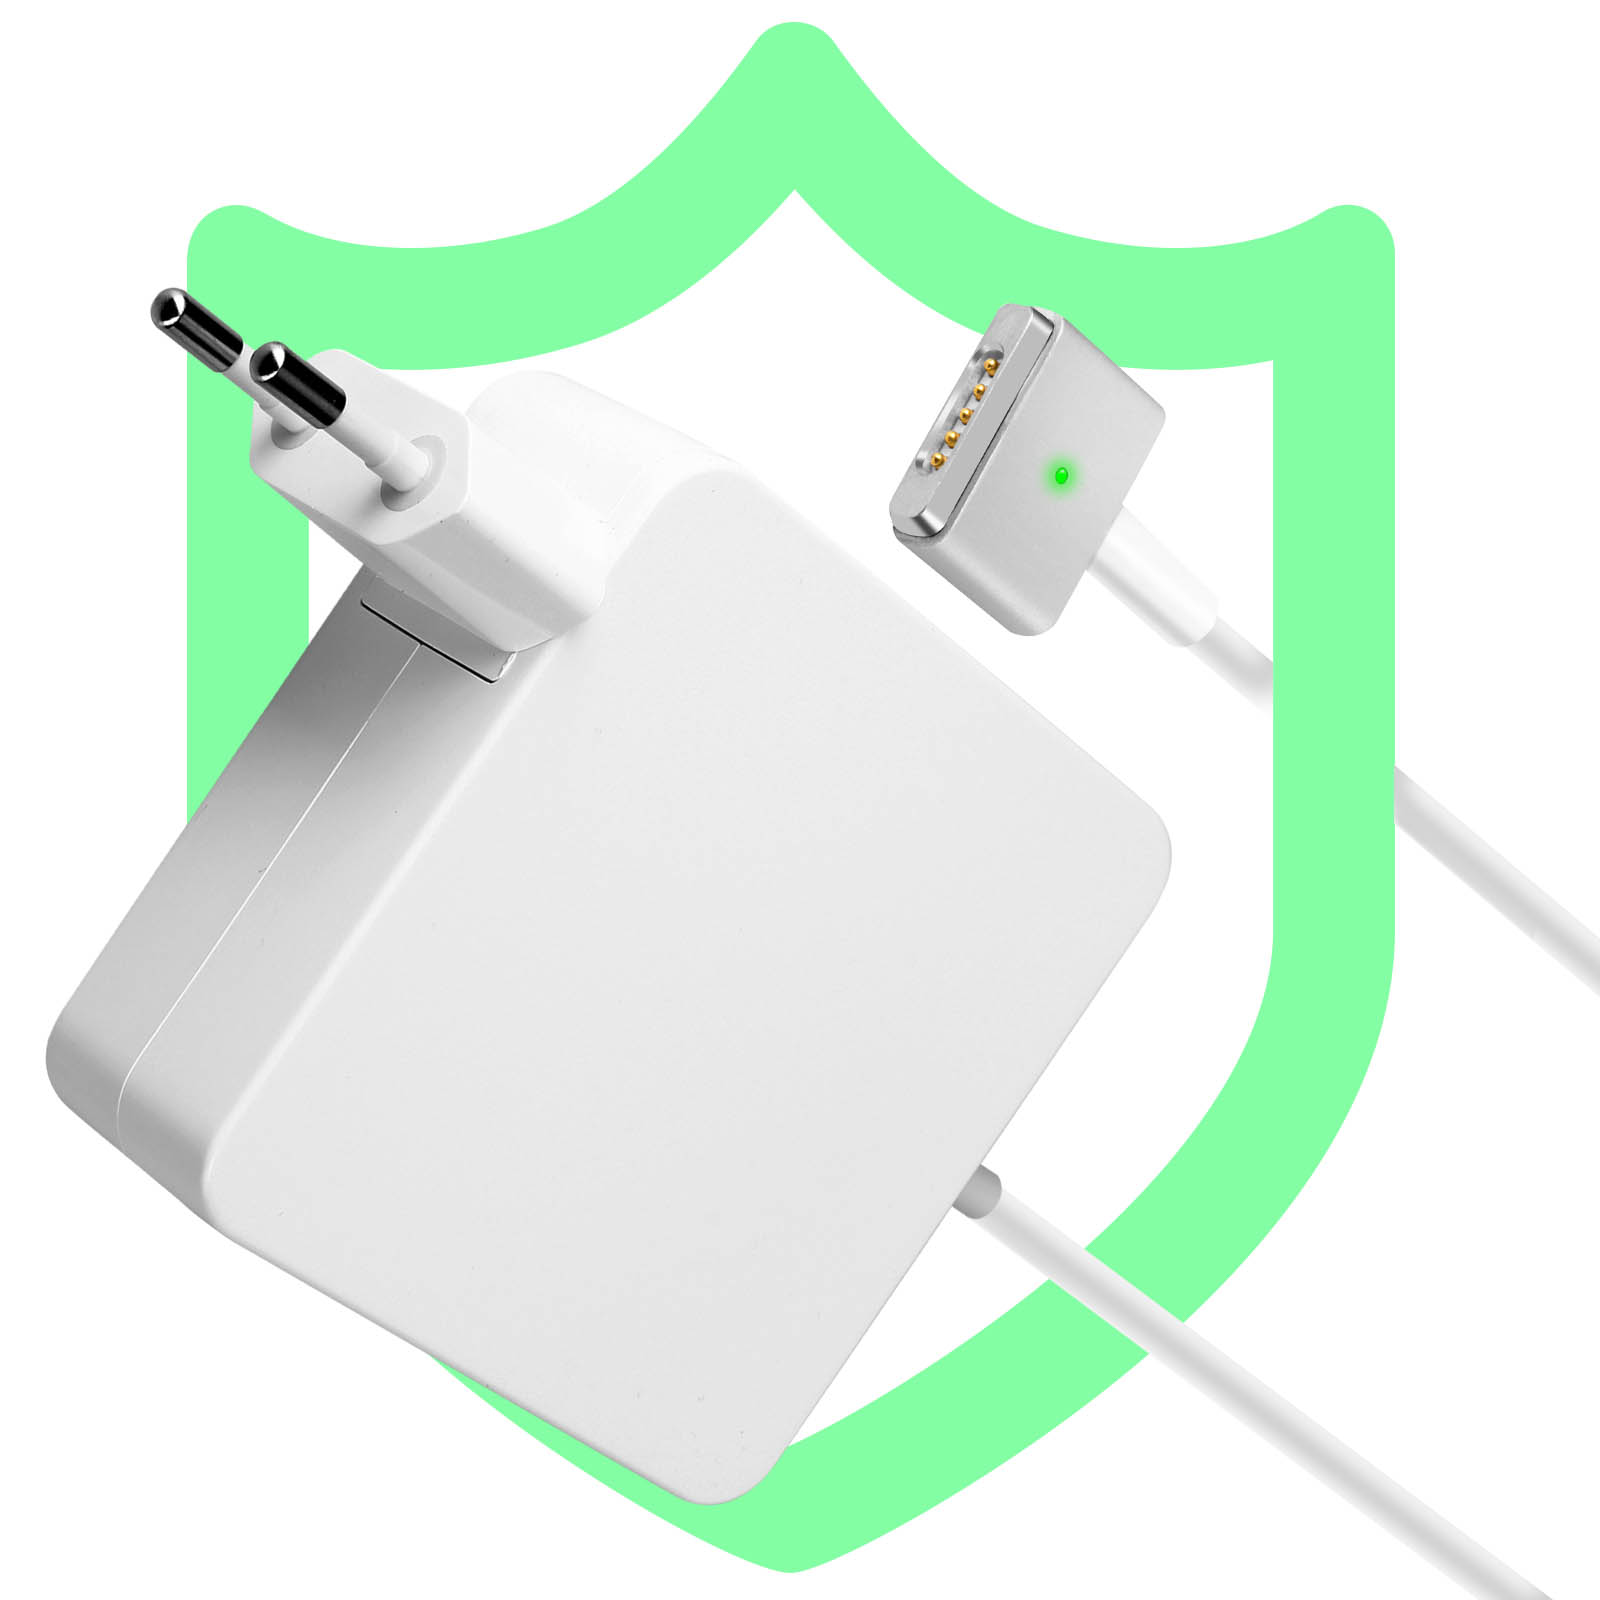 Chargeur Macbook - MagSafe 2 45W